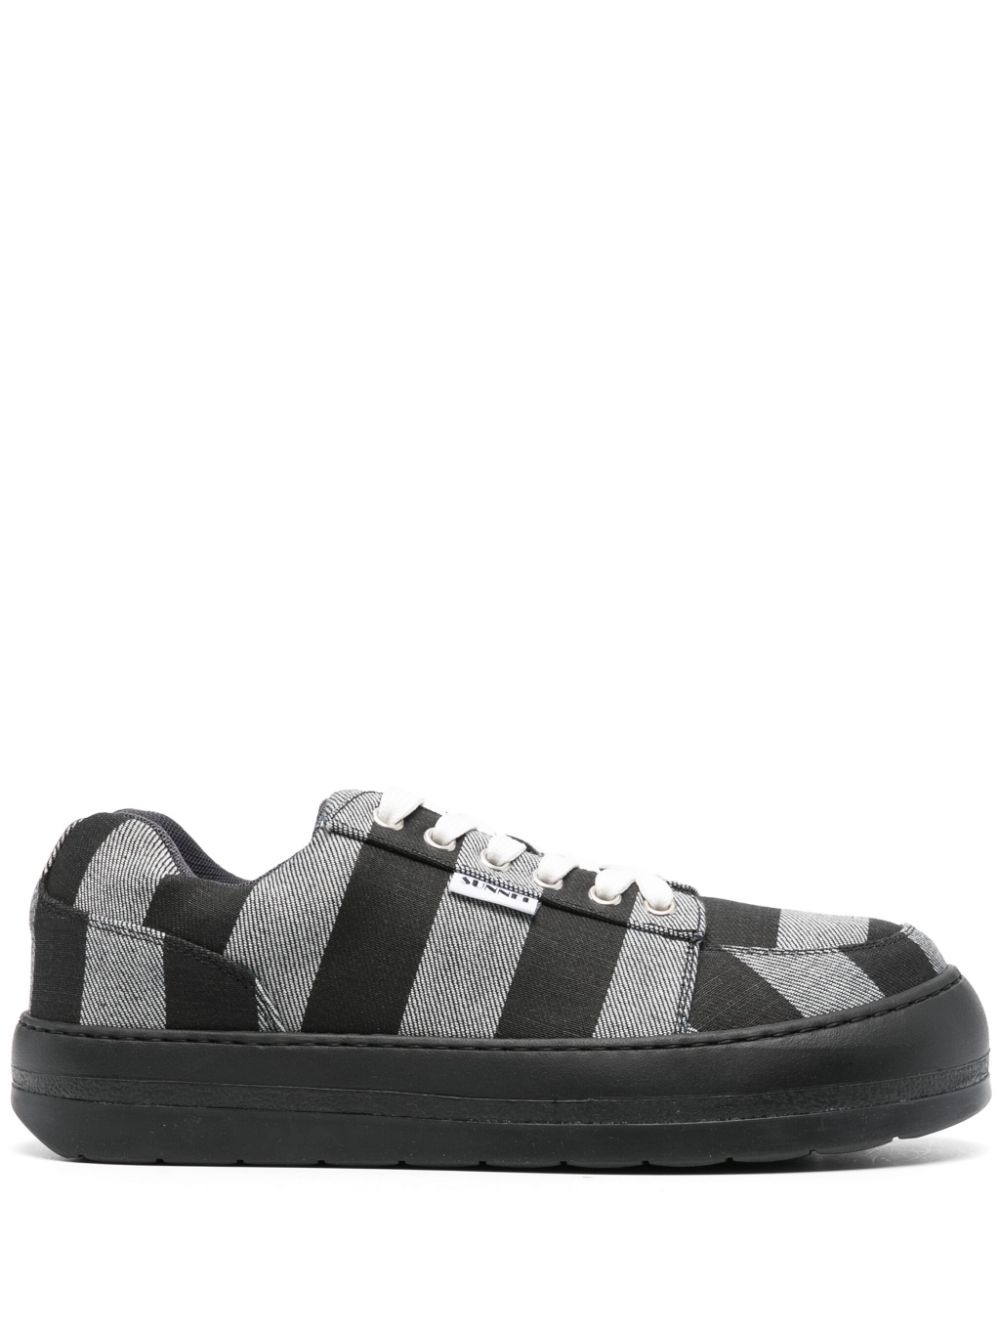 Dreamy Shoes striped sneakers - 1